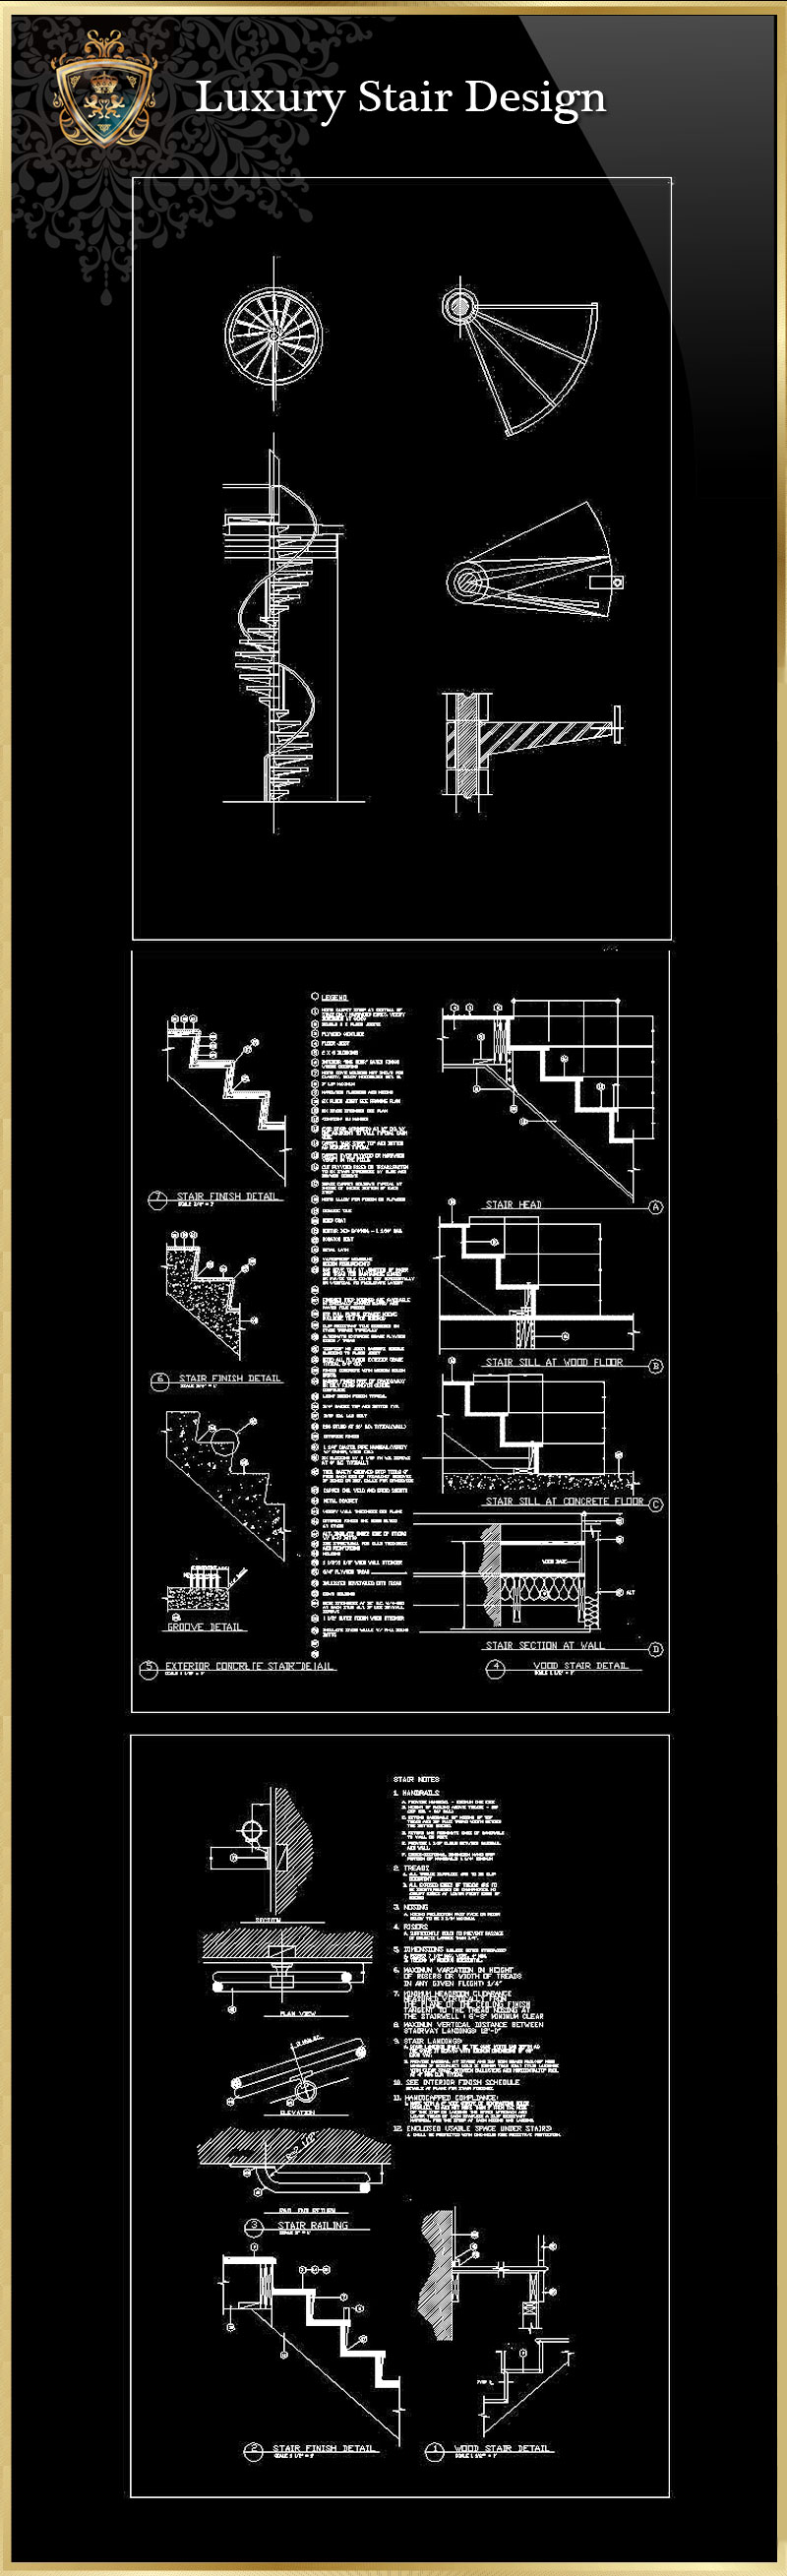 ★【Luxury Stair Design】Download Luxury Architectural Design CAD Drawings--Over 20000+ High quality CAD Blocks and Drawings Download!